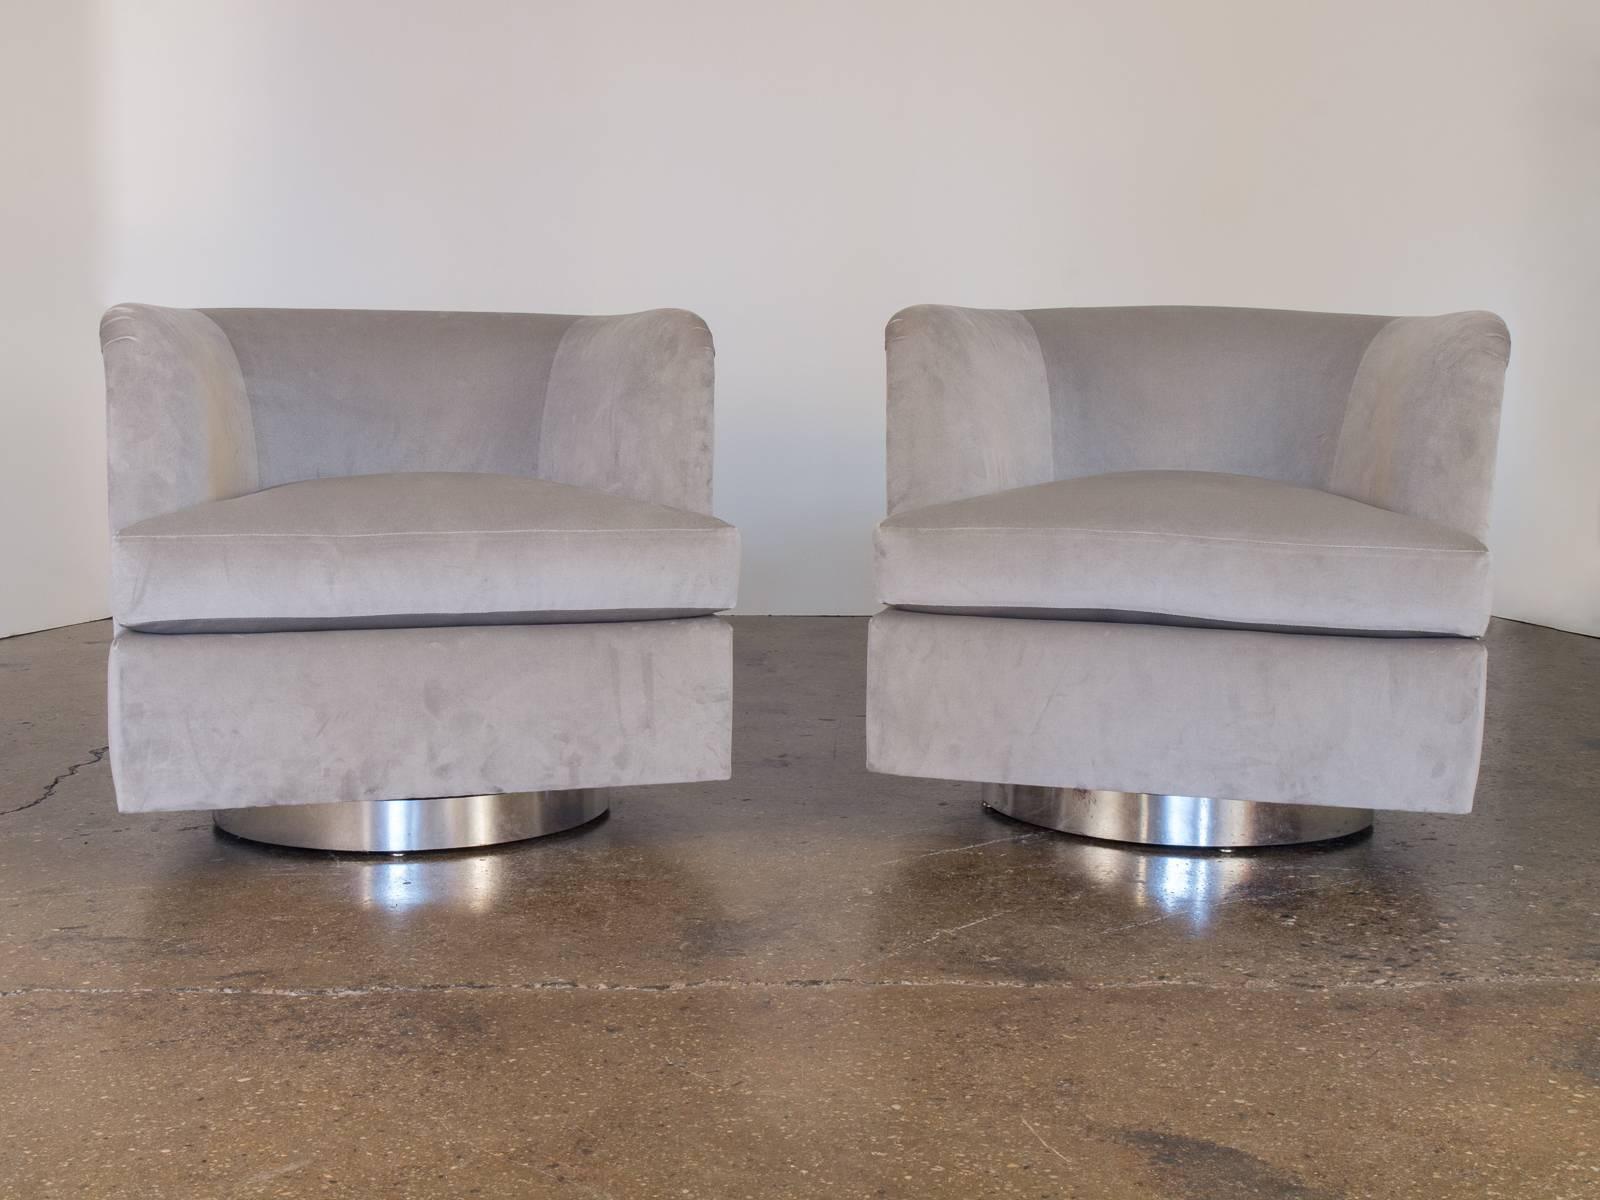 Pair of sleek 1960s swivel lounge chairs by Milo Baughman for Thayer Coggin. These chairs have a tilt feature that makes them supremely comfortable. Brushed metal banding. Newly recovered in luxurious romo velvet in a silvery gray.

Measures: